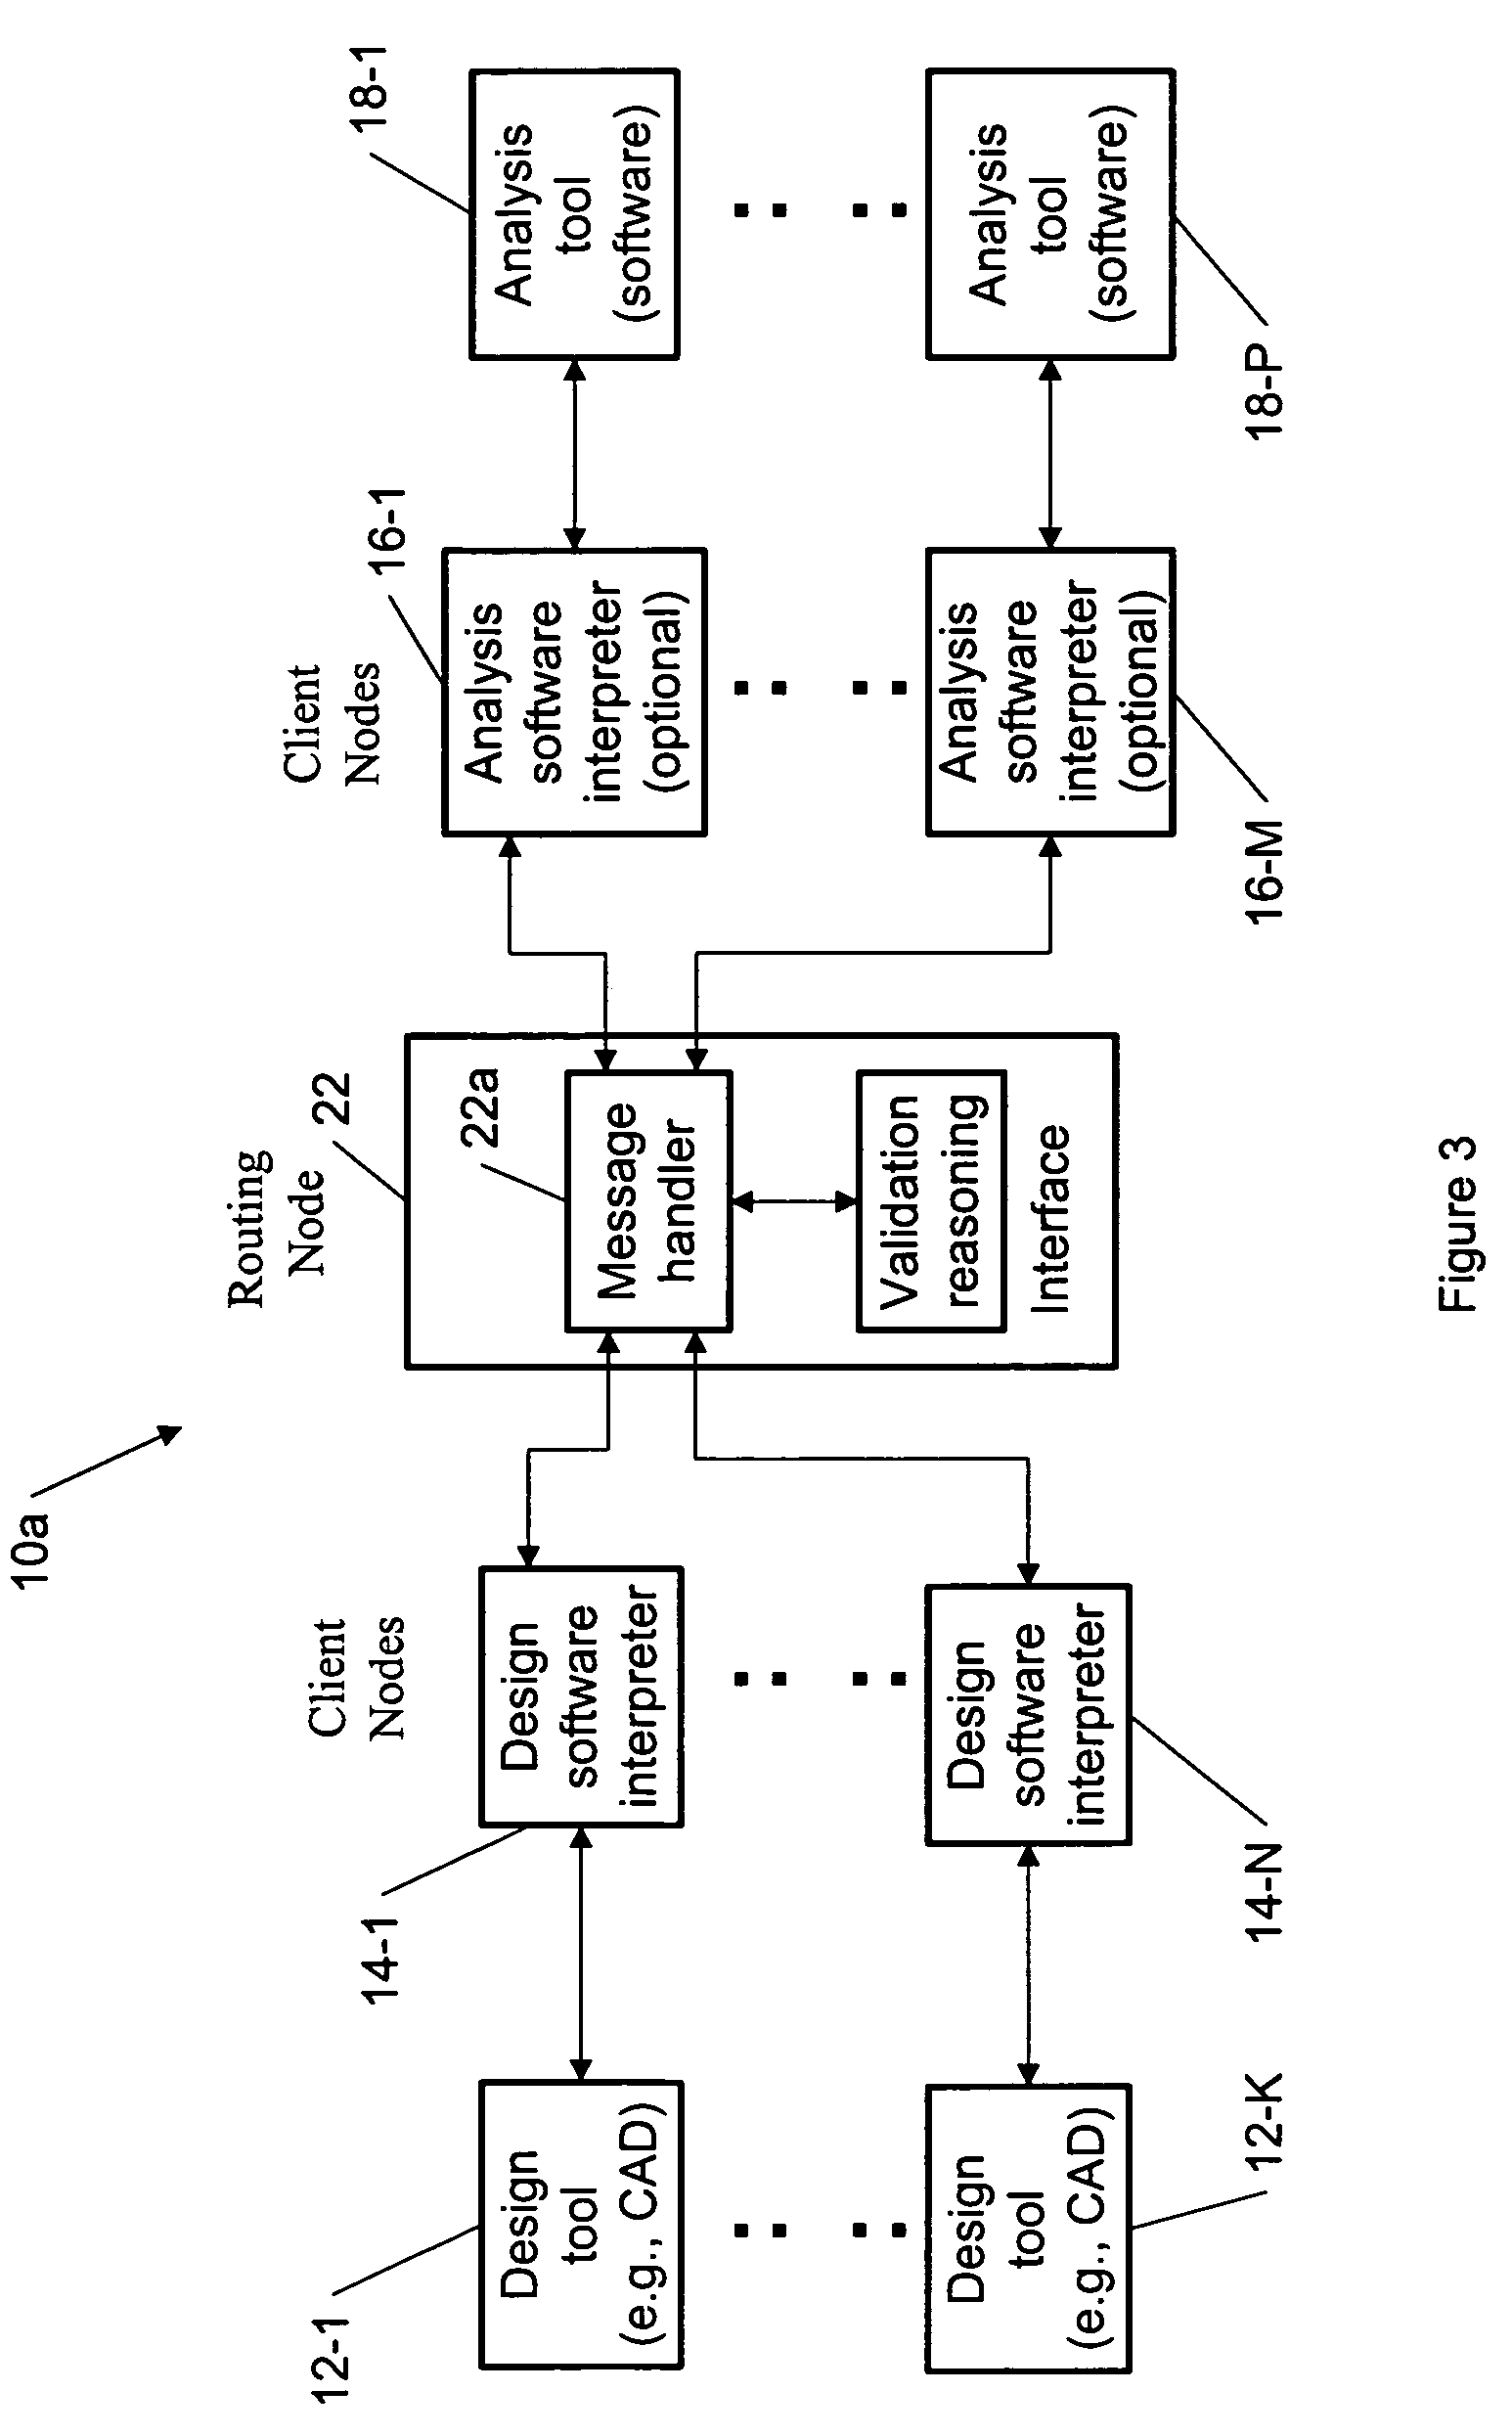 Automatic control system generation for robot design validation